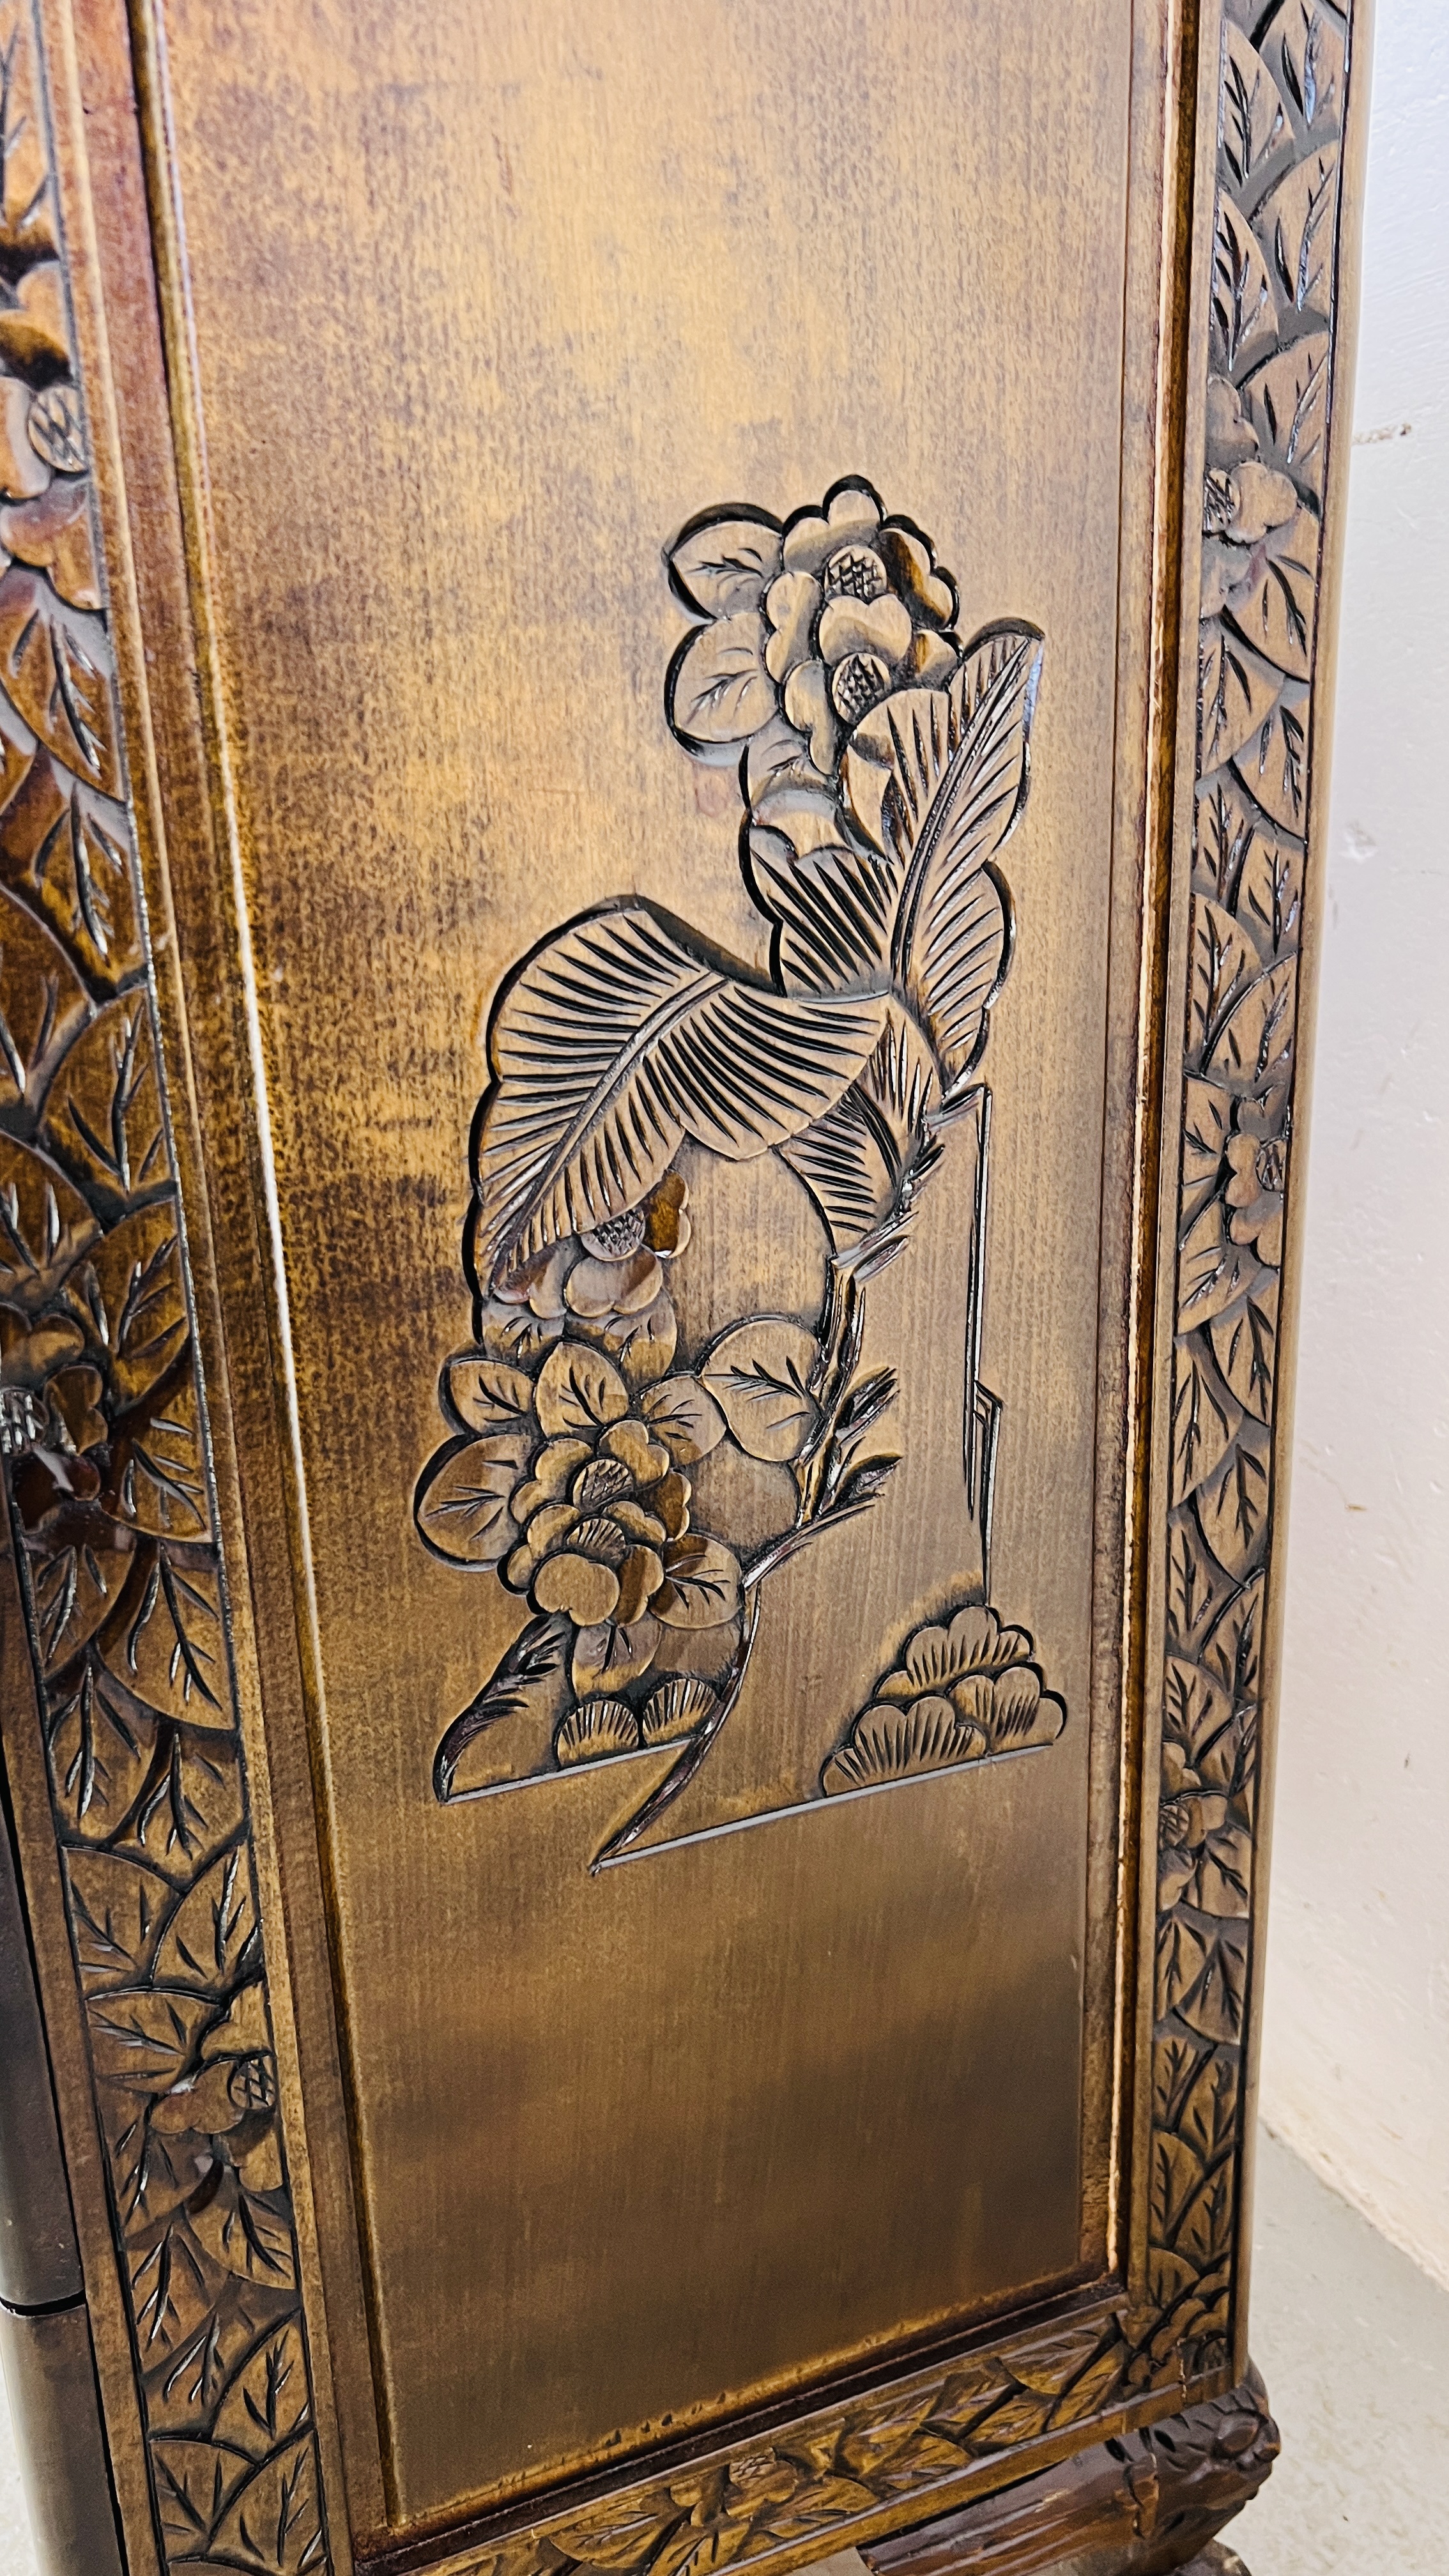 A 5 DRAWER HARDWOOD CHEST WITH A PAIR OF STALKS CARVED TO TOP AND FLORAL DECORATION CARVING - W - Image 6 of 11